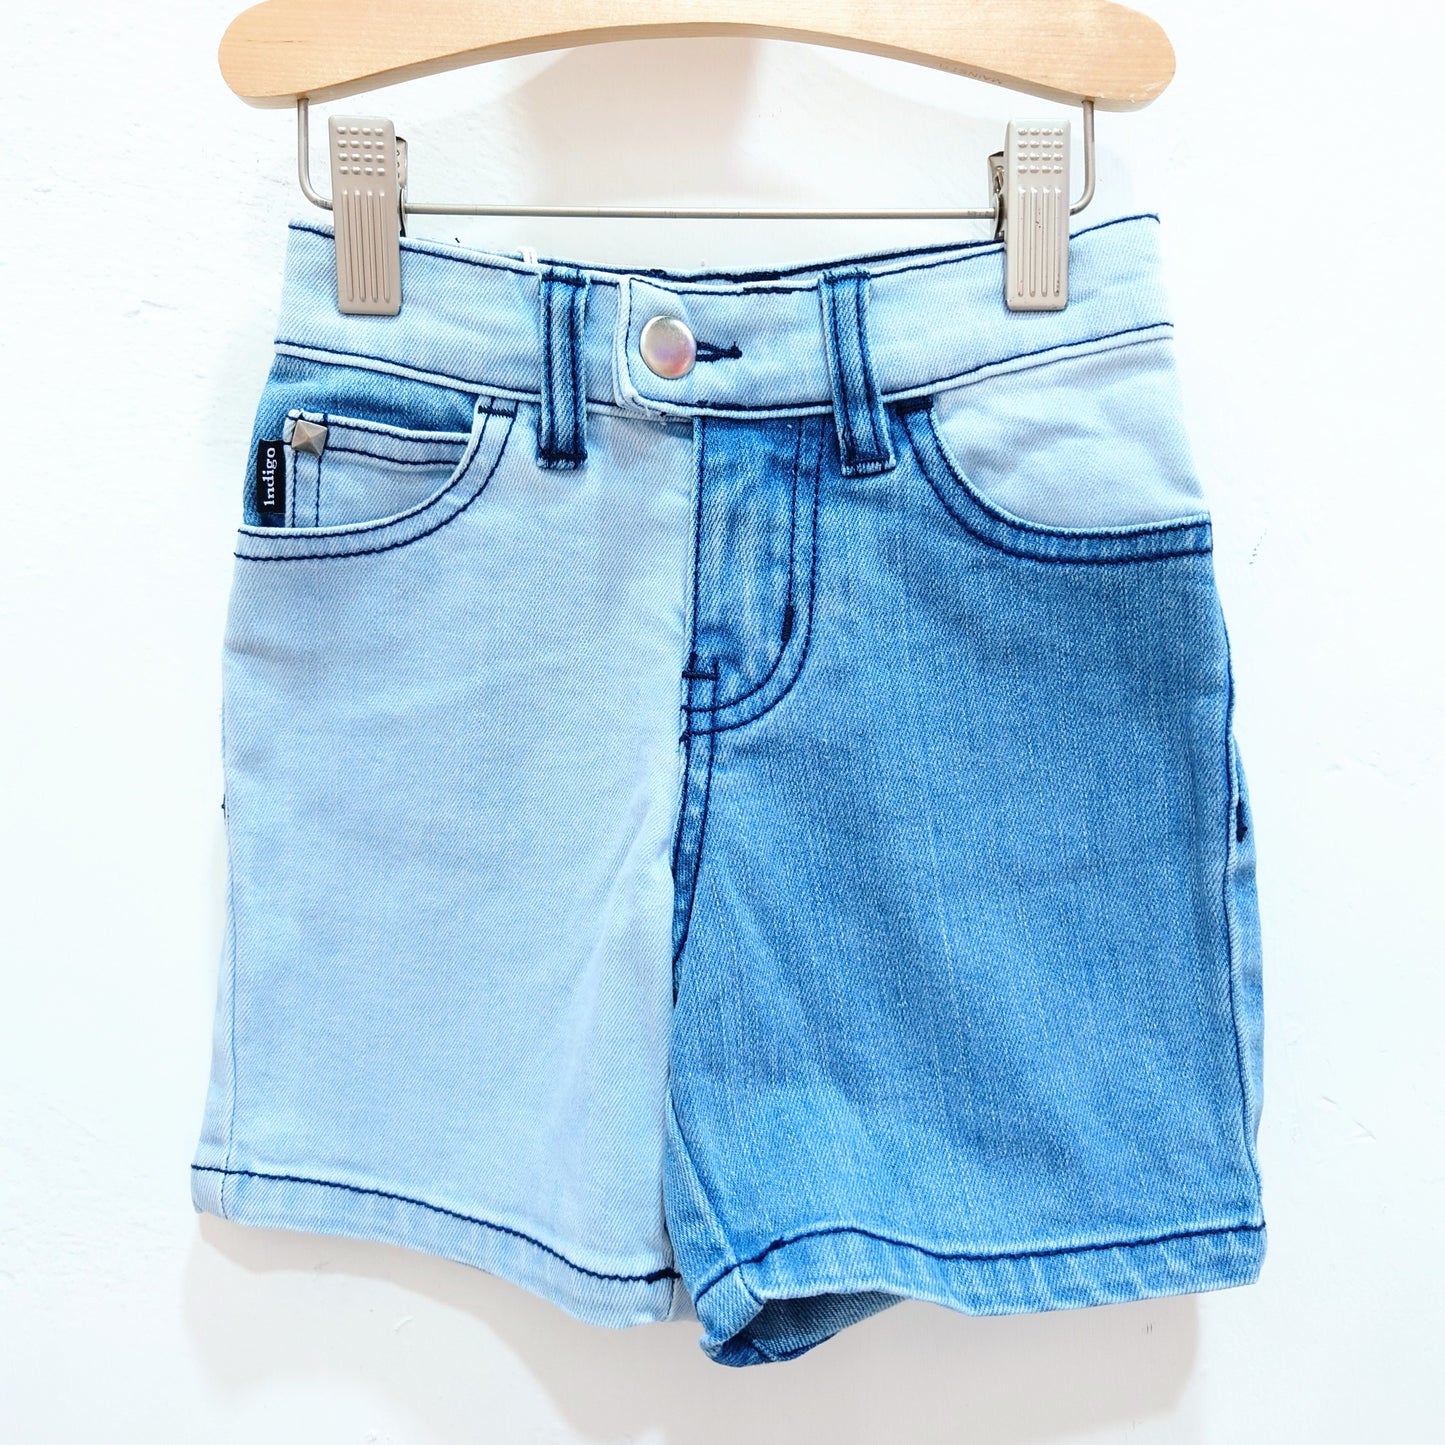 Two Tone Shorts